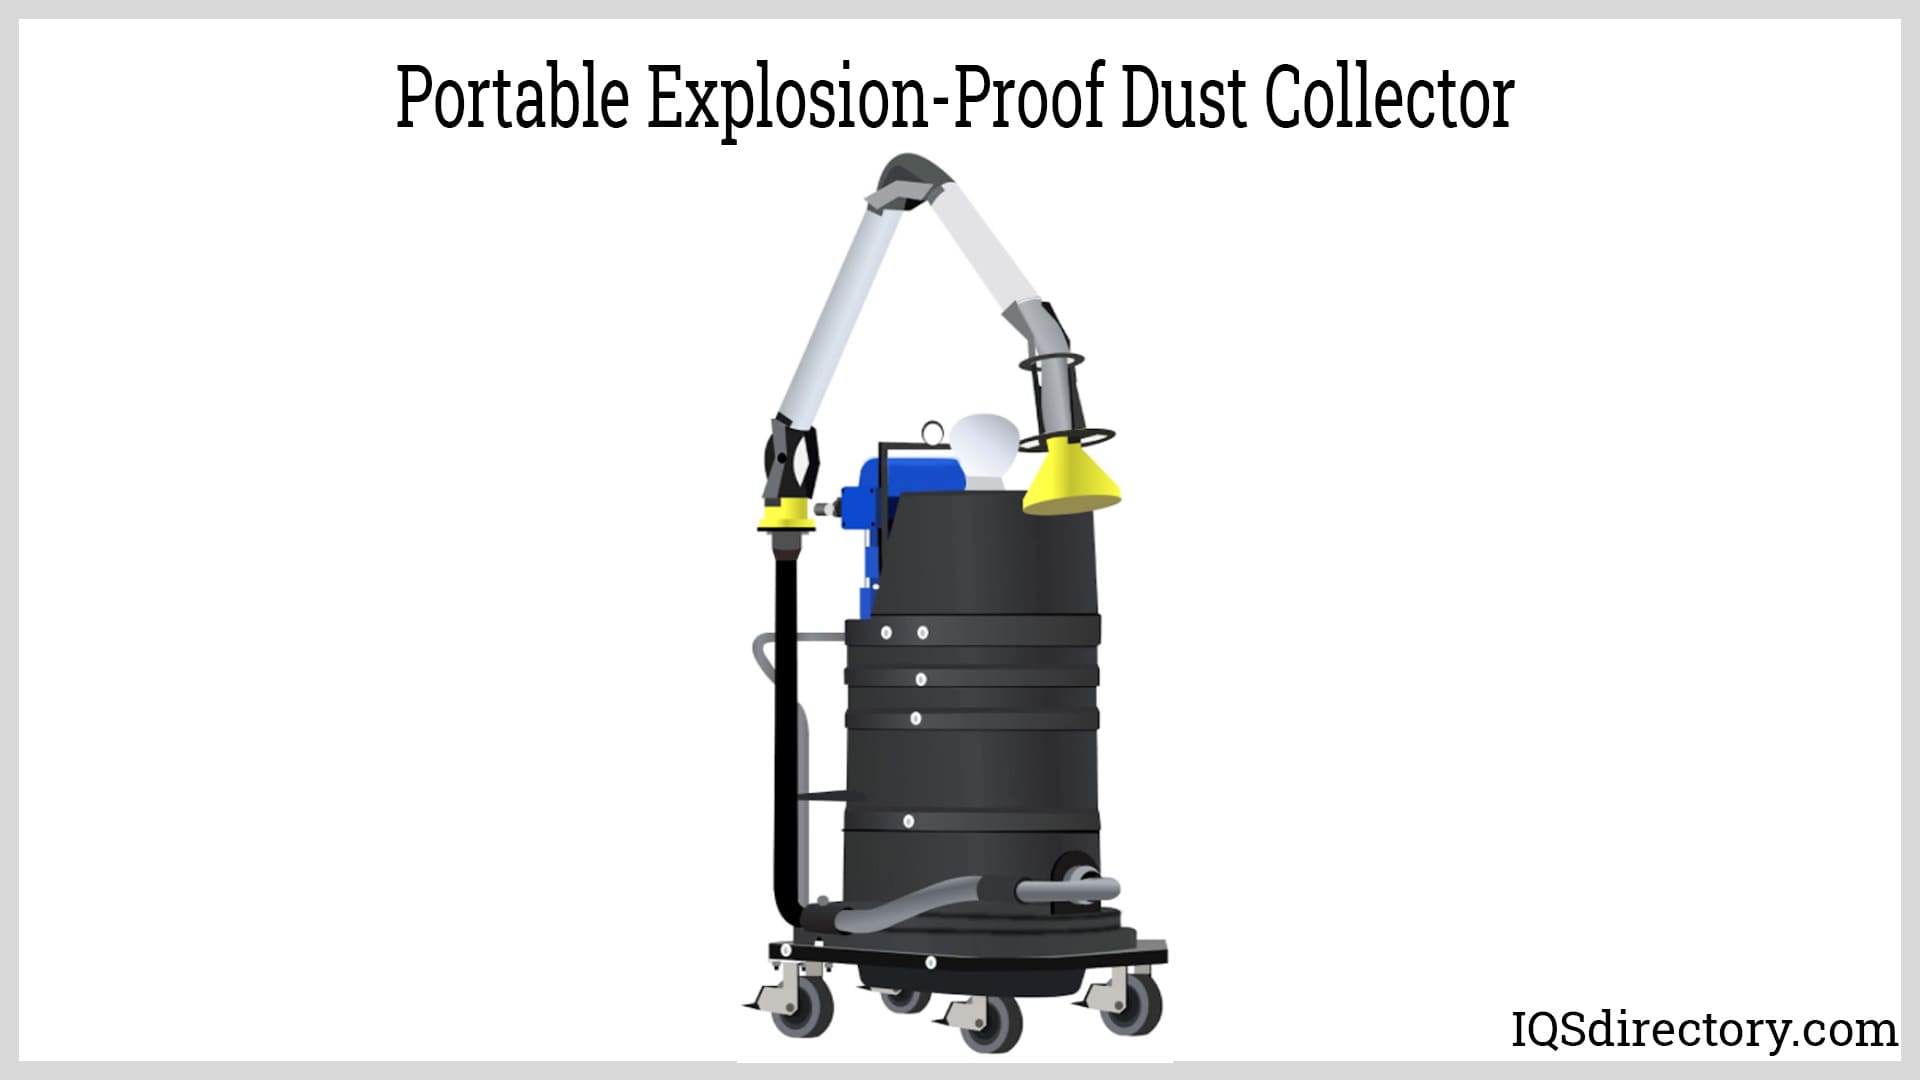 Explosion-Proof Dust Collectors